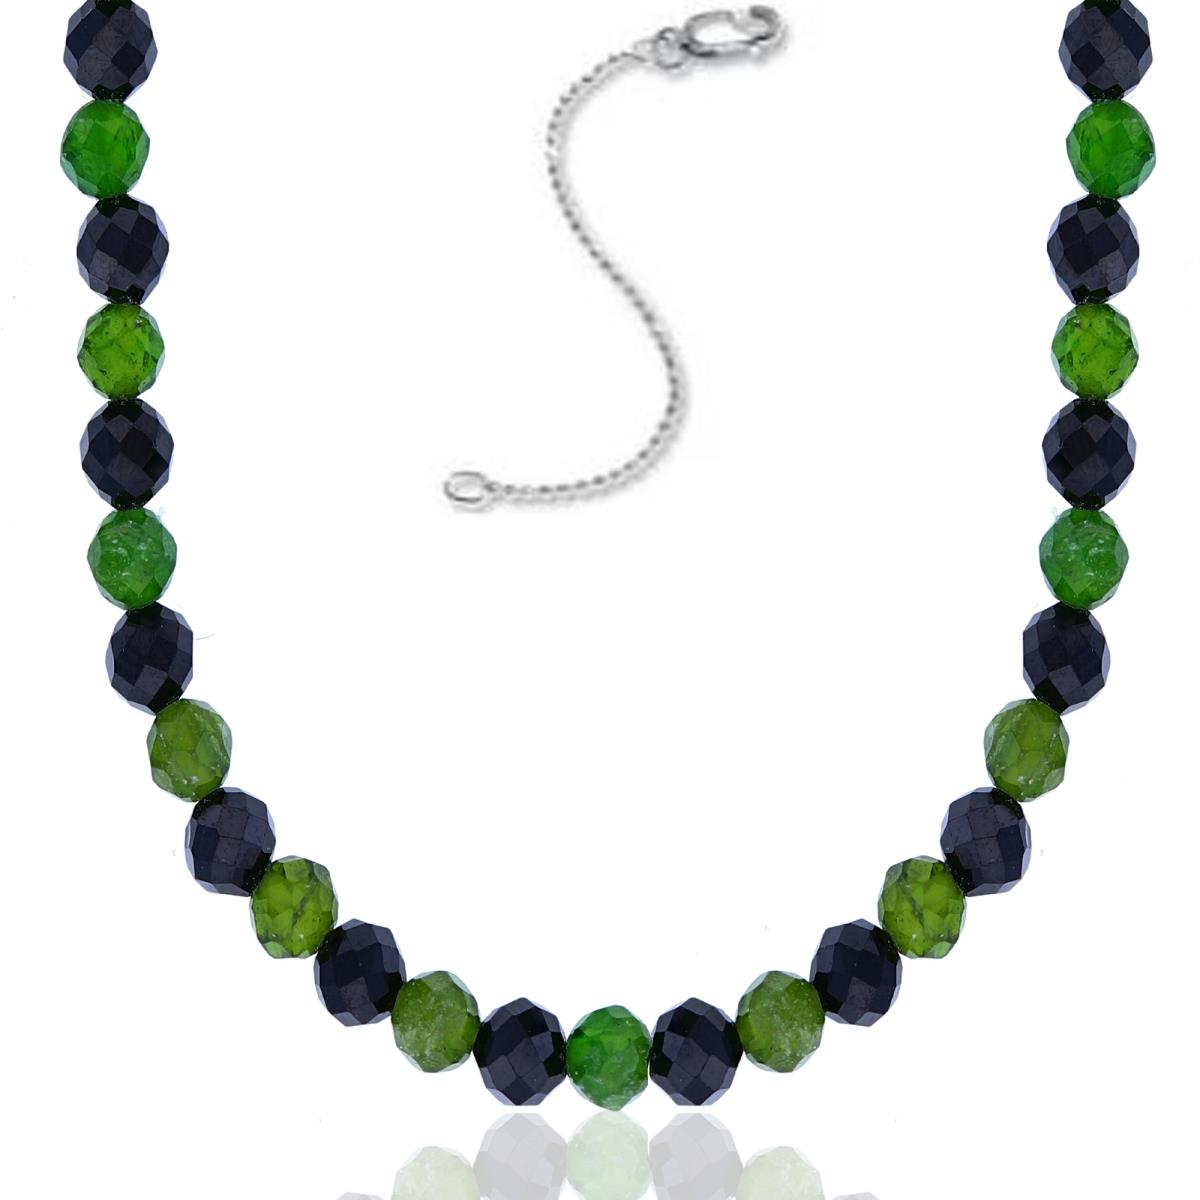 Sterling Silver Rhodium 4mm Rondelle Black Spinel & Chrome Diopside Beaded 16"+2" Necklace